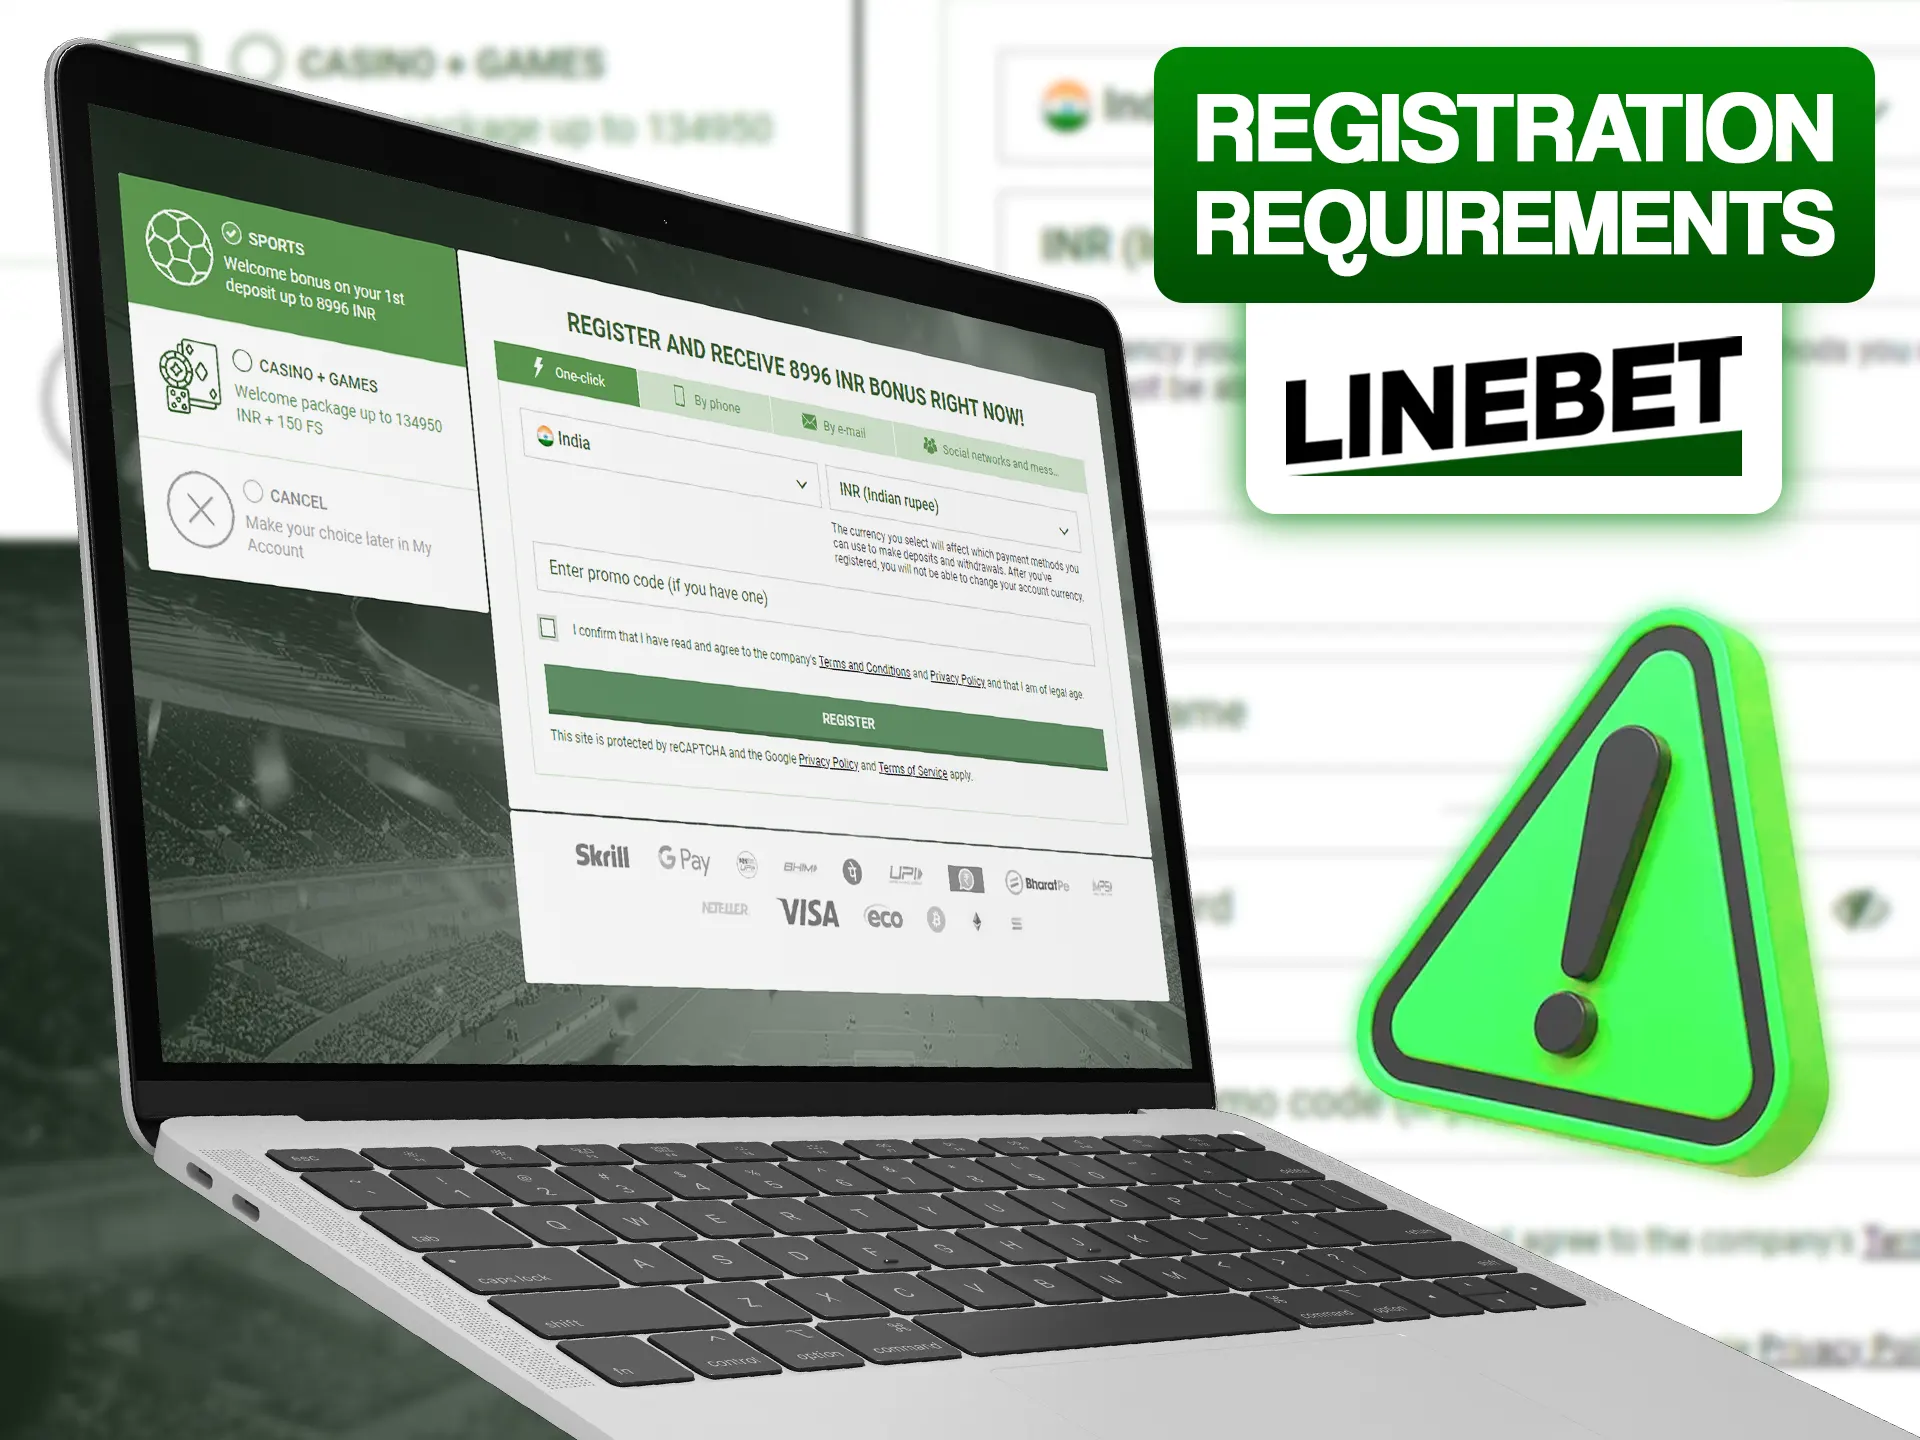 Make sure you follow all of the Linebet registration requirements.